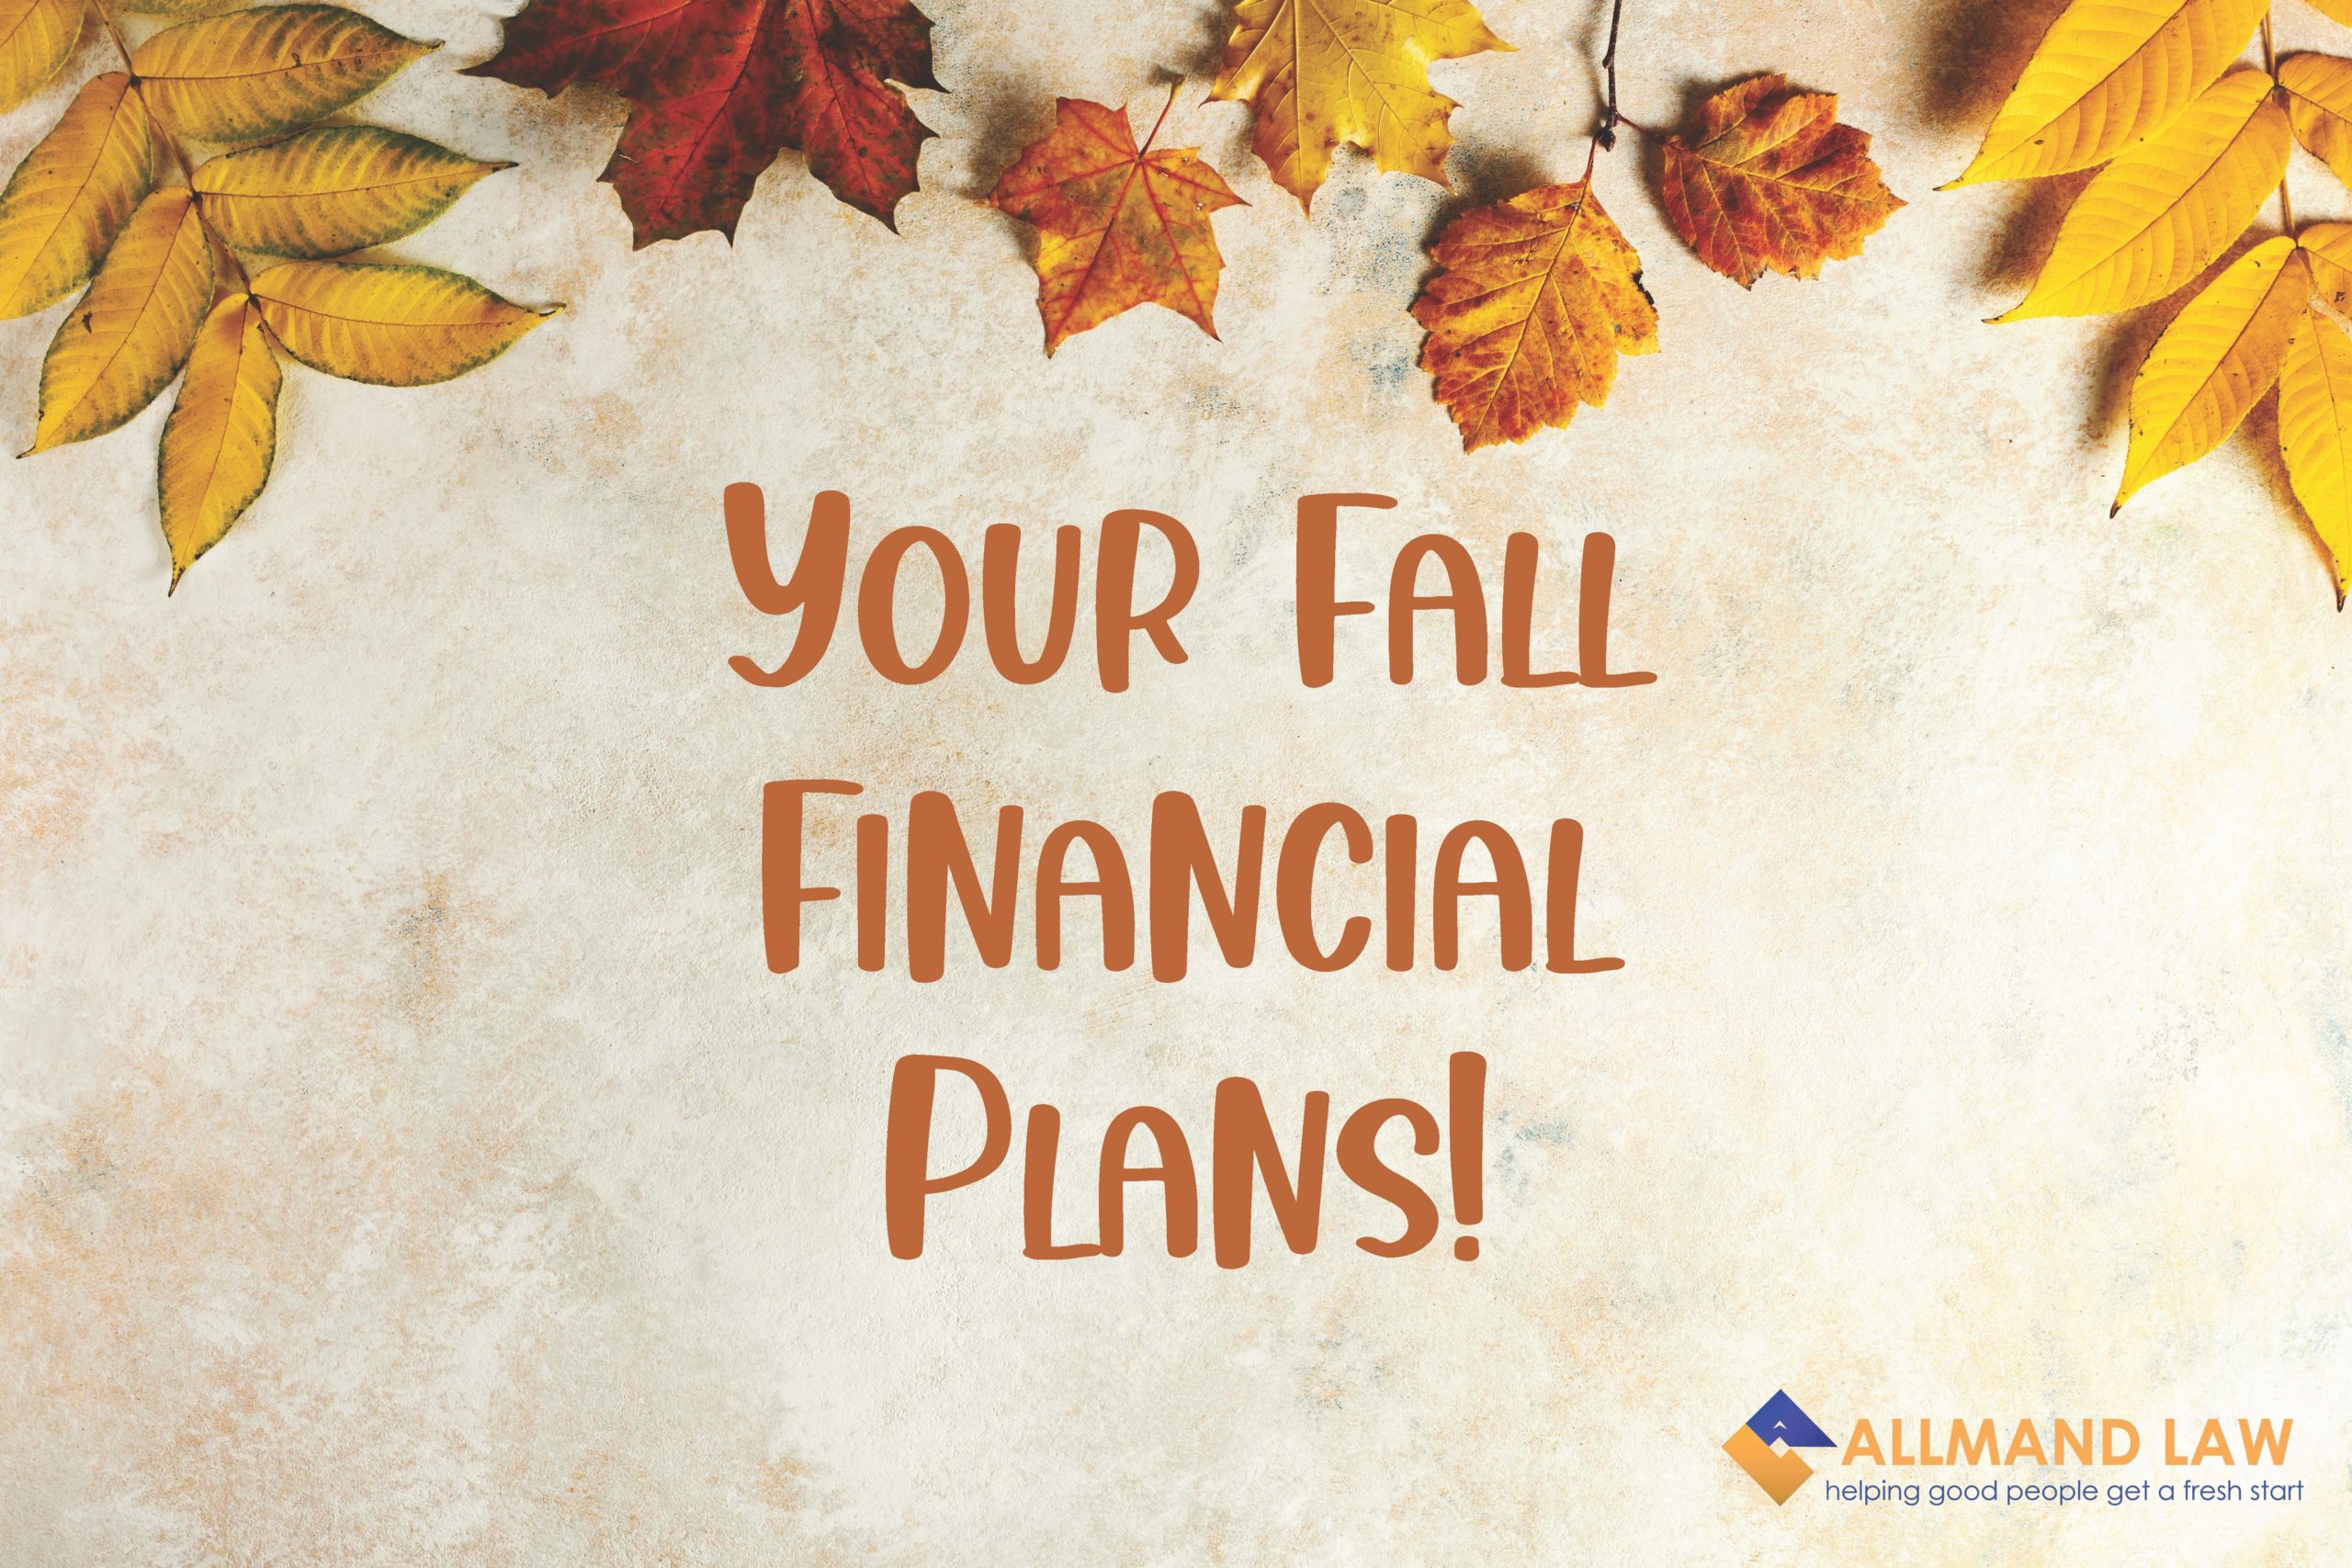 Your Fall Financial Plans